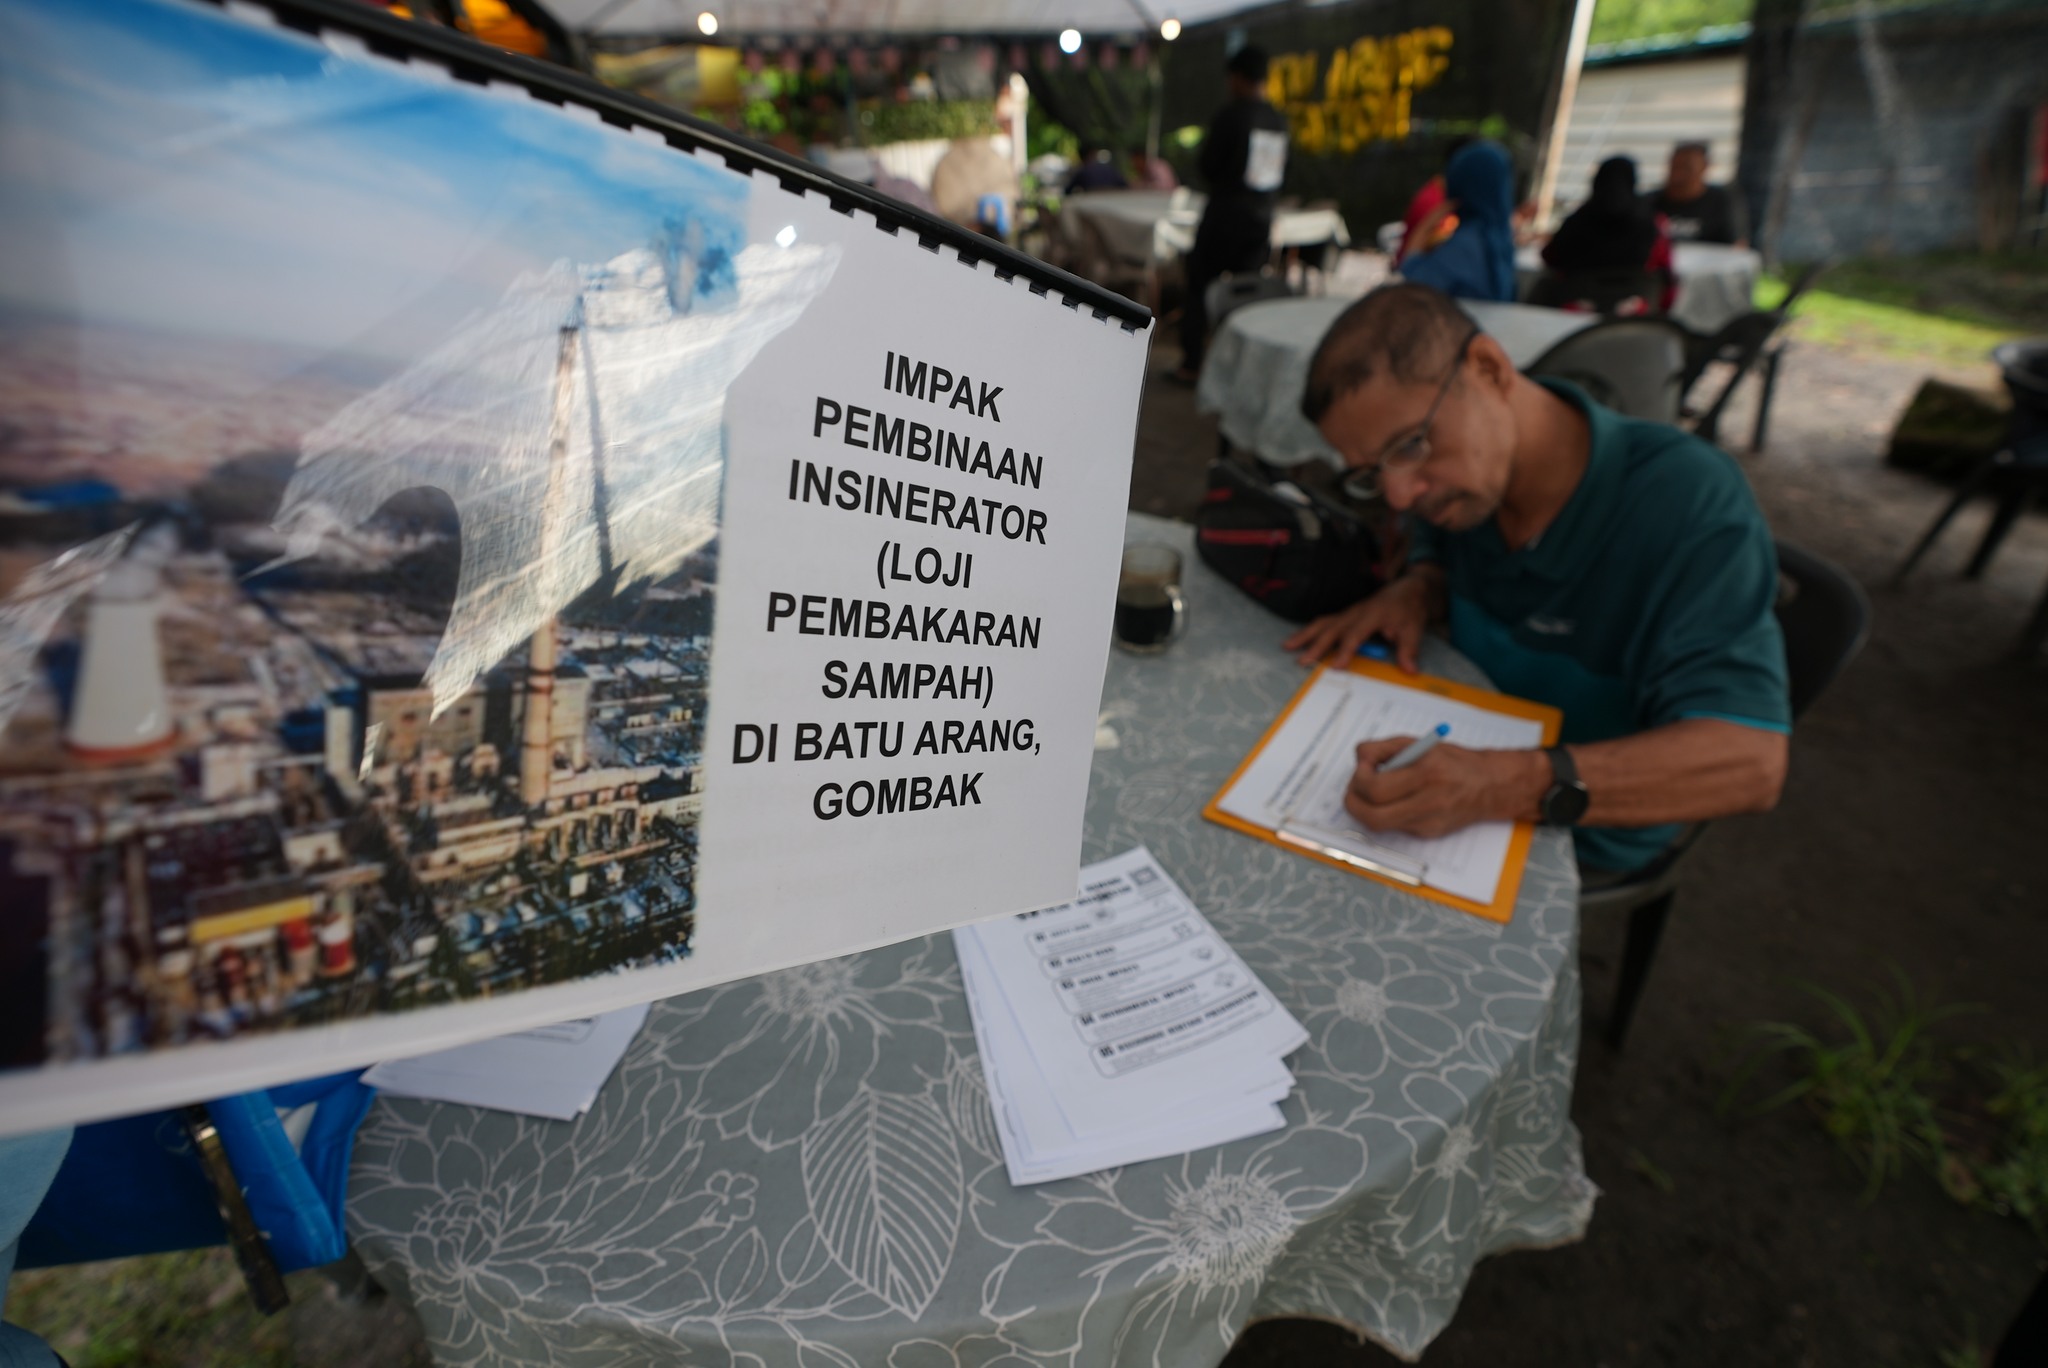 Build it in your own backyard: Rawang anti-incinerator group dares Selangor MB over unwanted project